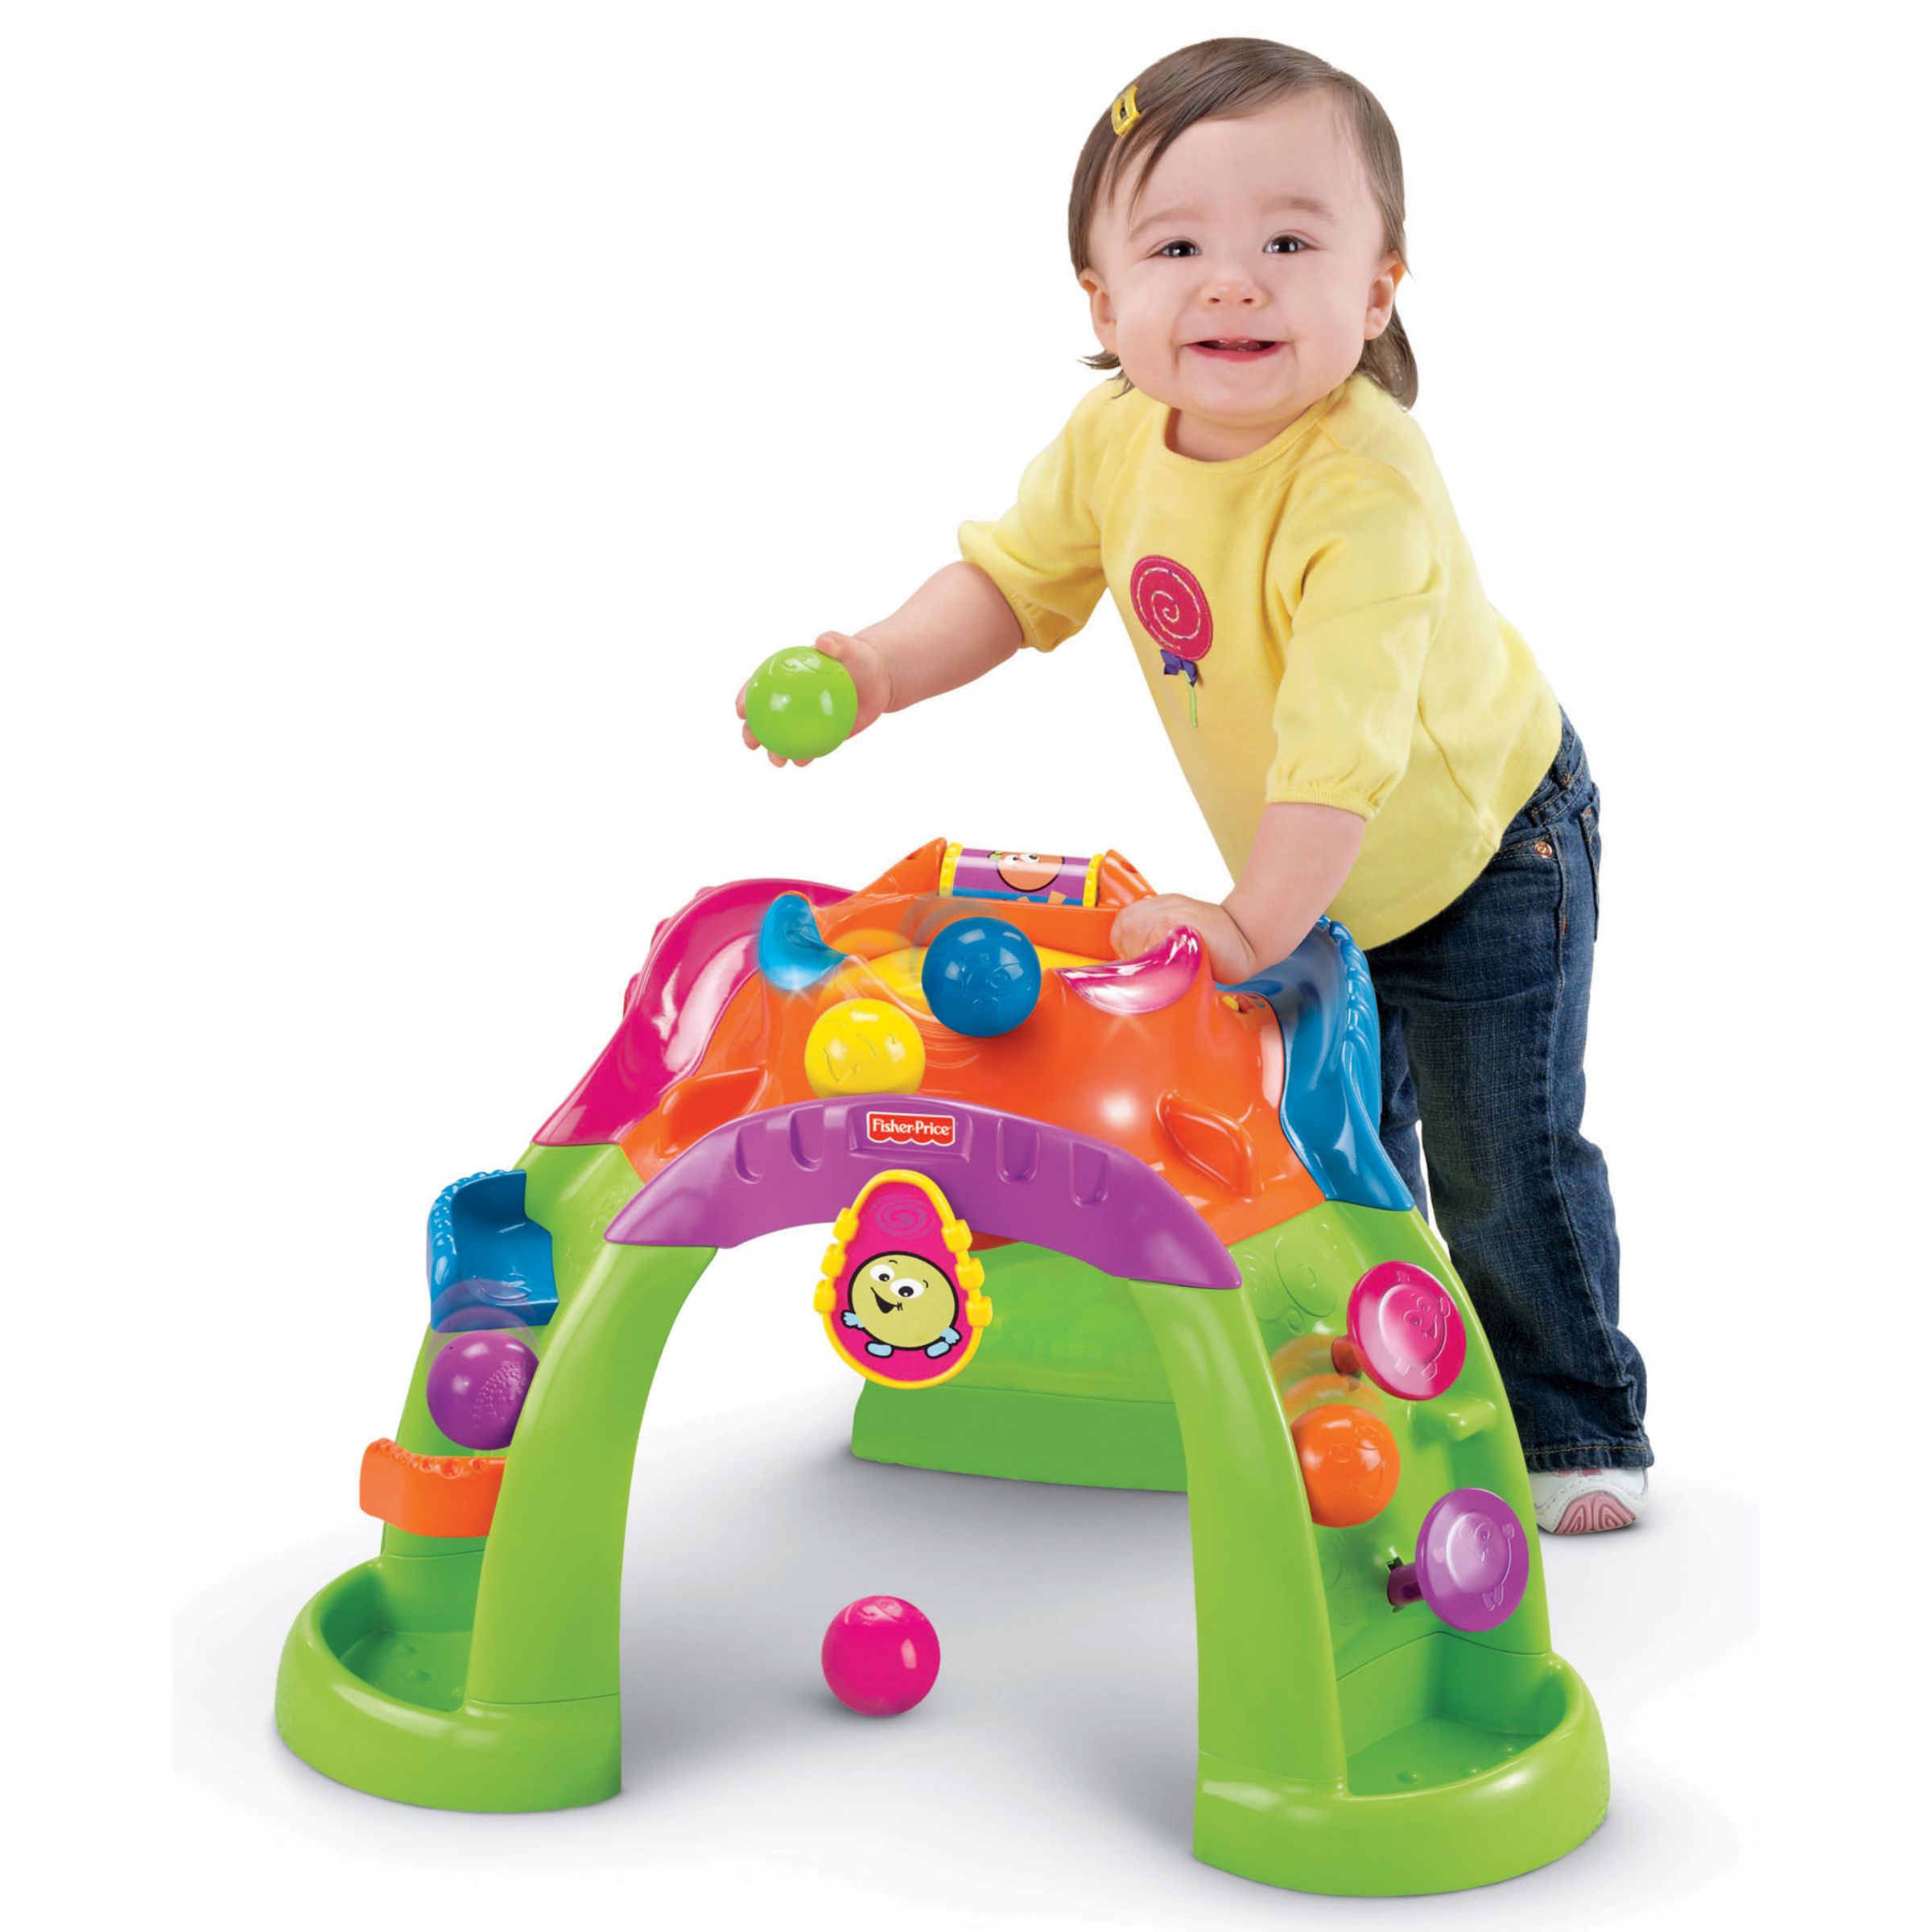 fisher price stand up toy